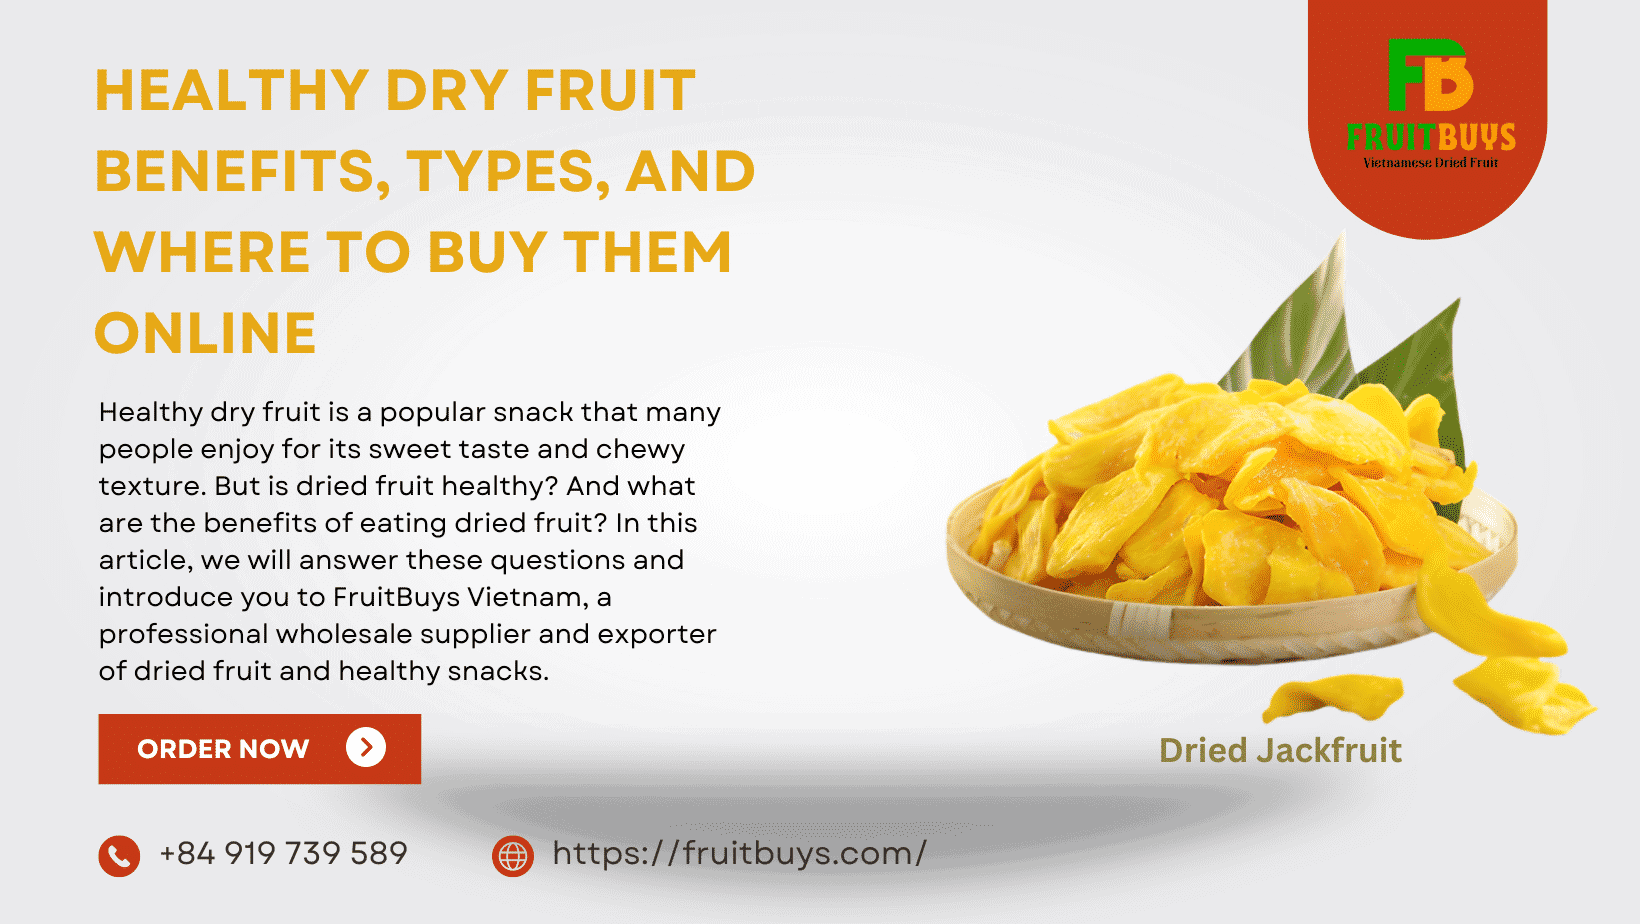 Fruitbuys Vietnam Healthy Dry Fruit Benefits Types And Where To Buy Them Online